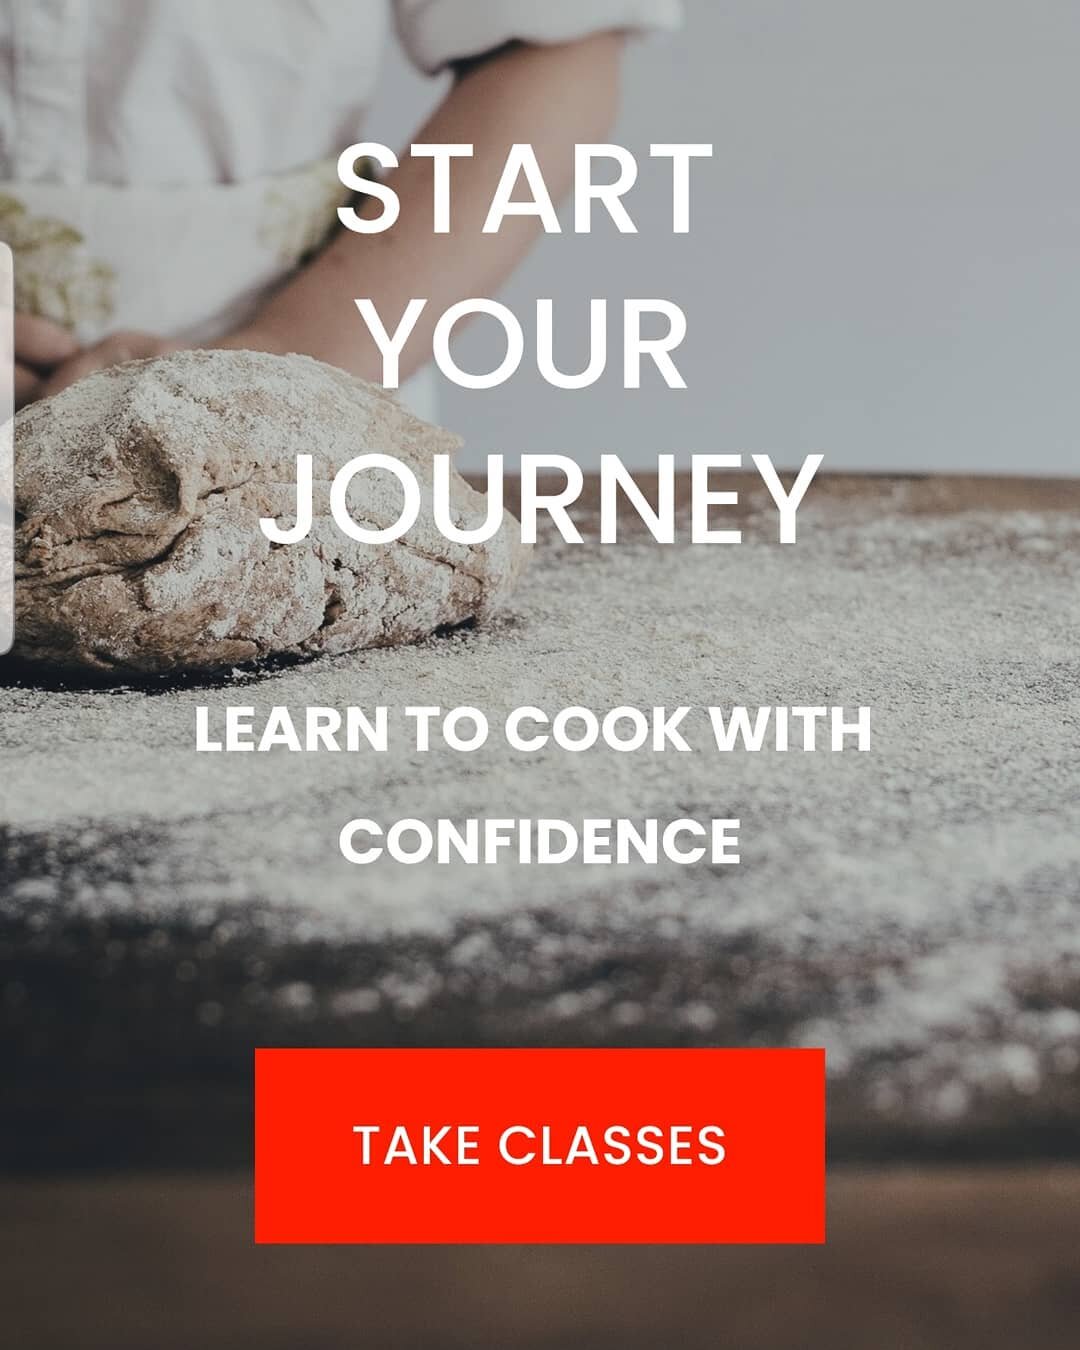 Learning how to cook shouldnt be difficult, and you dont have to do it alone. Join me in virtual class side-by-side with other students over Zoom and learn how to cook at home! Link in the bio!